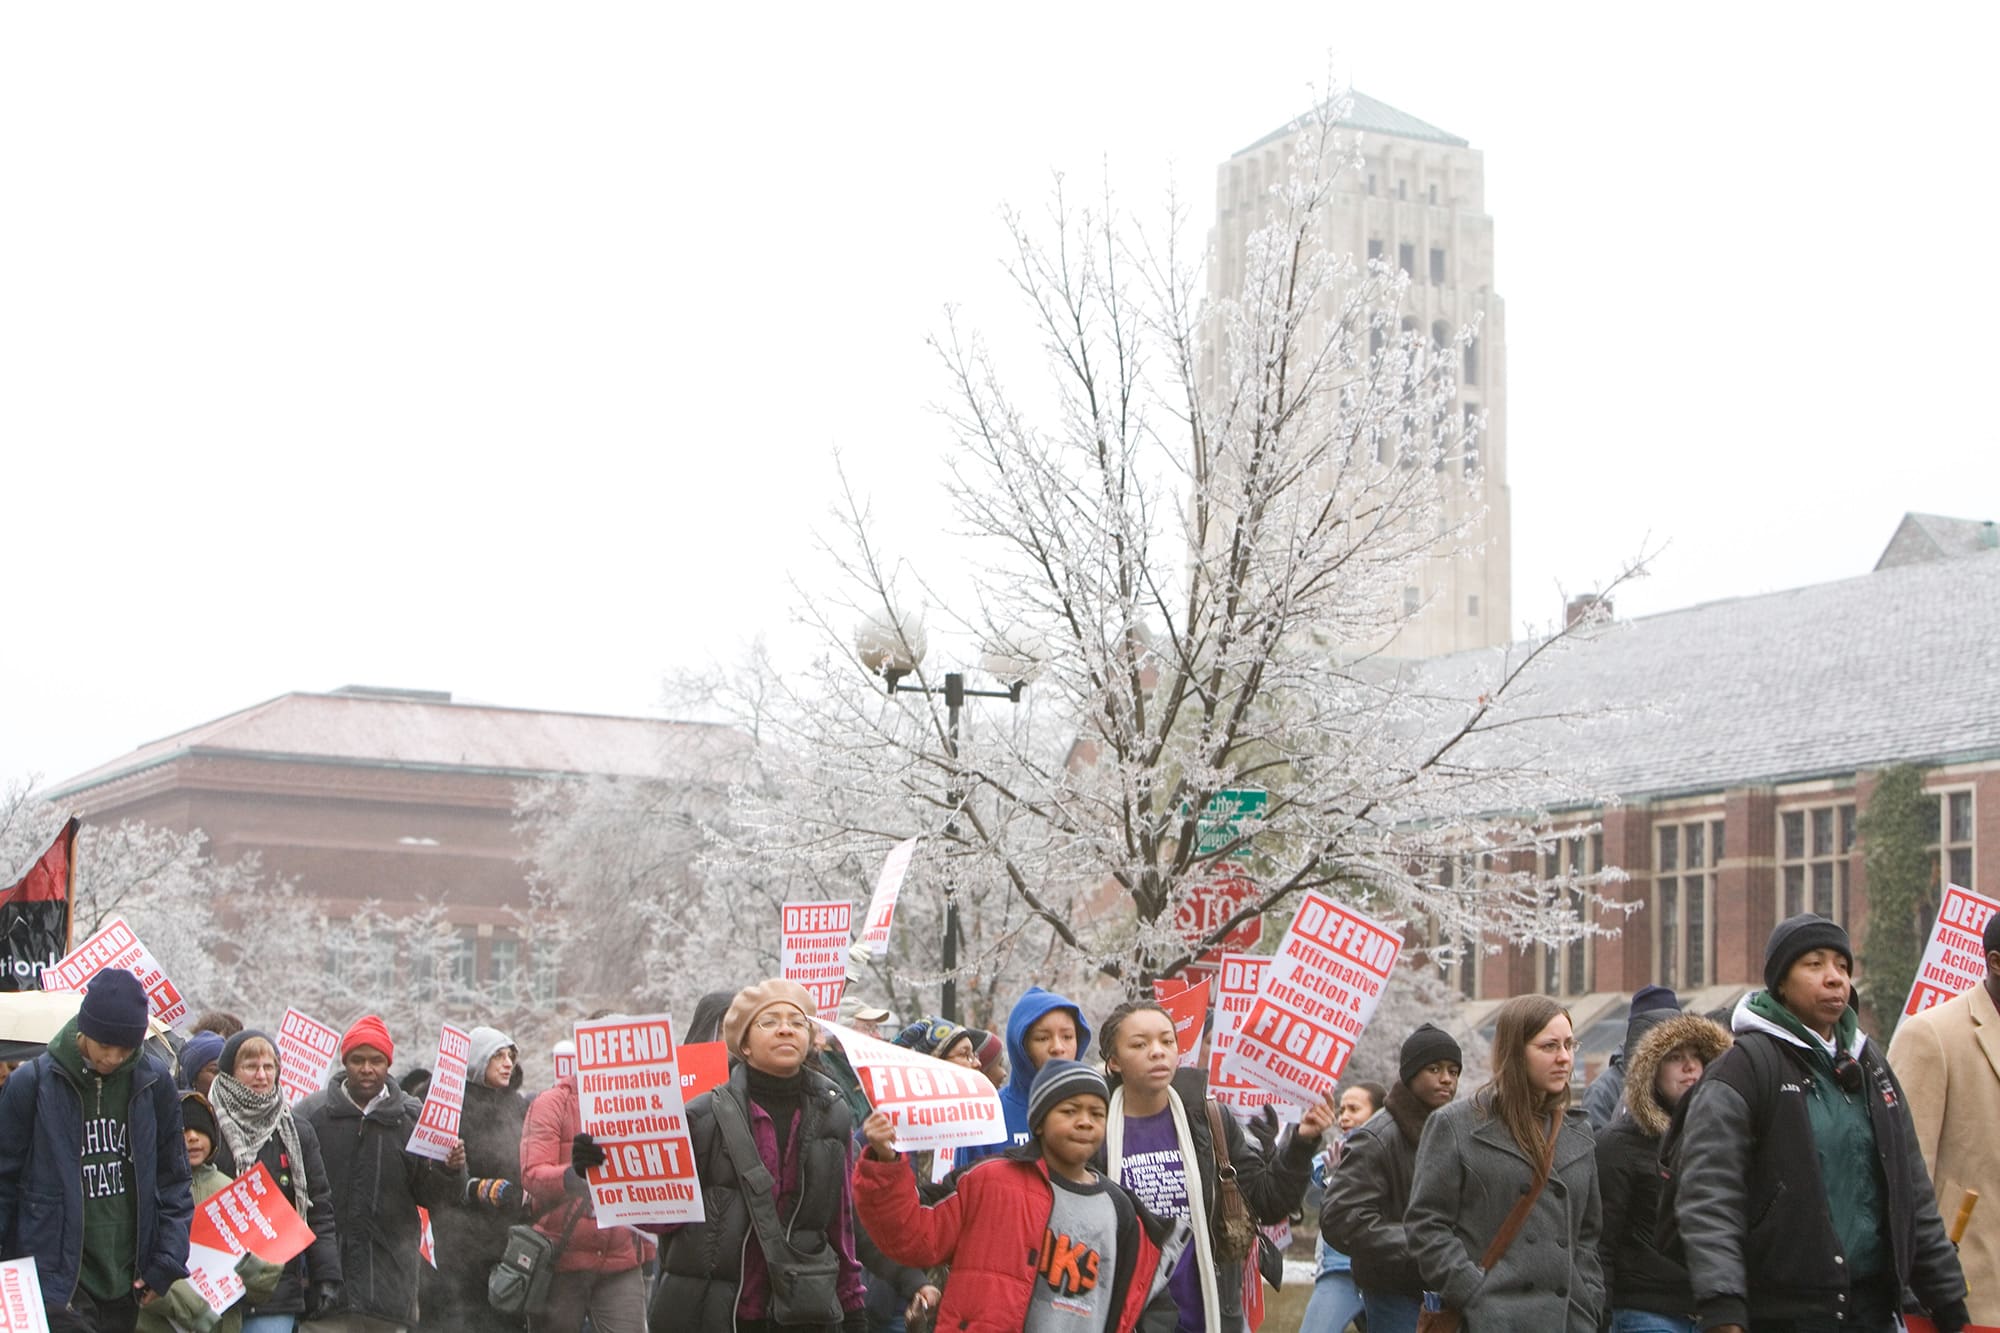 Demonstrators march through the streets of Ann Arbor holding signs that read "Defend Affirmative Action and Integration. Fight for Equality."